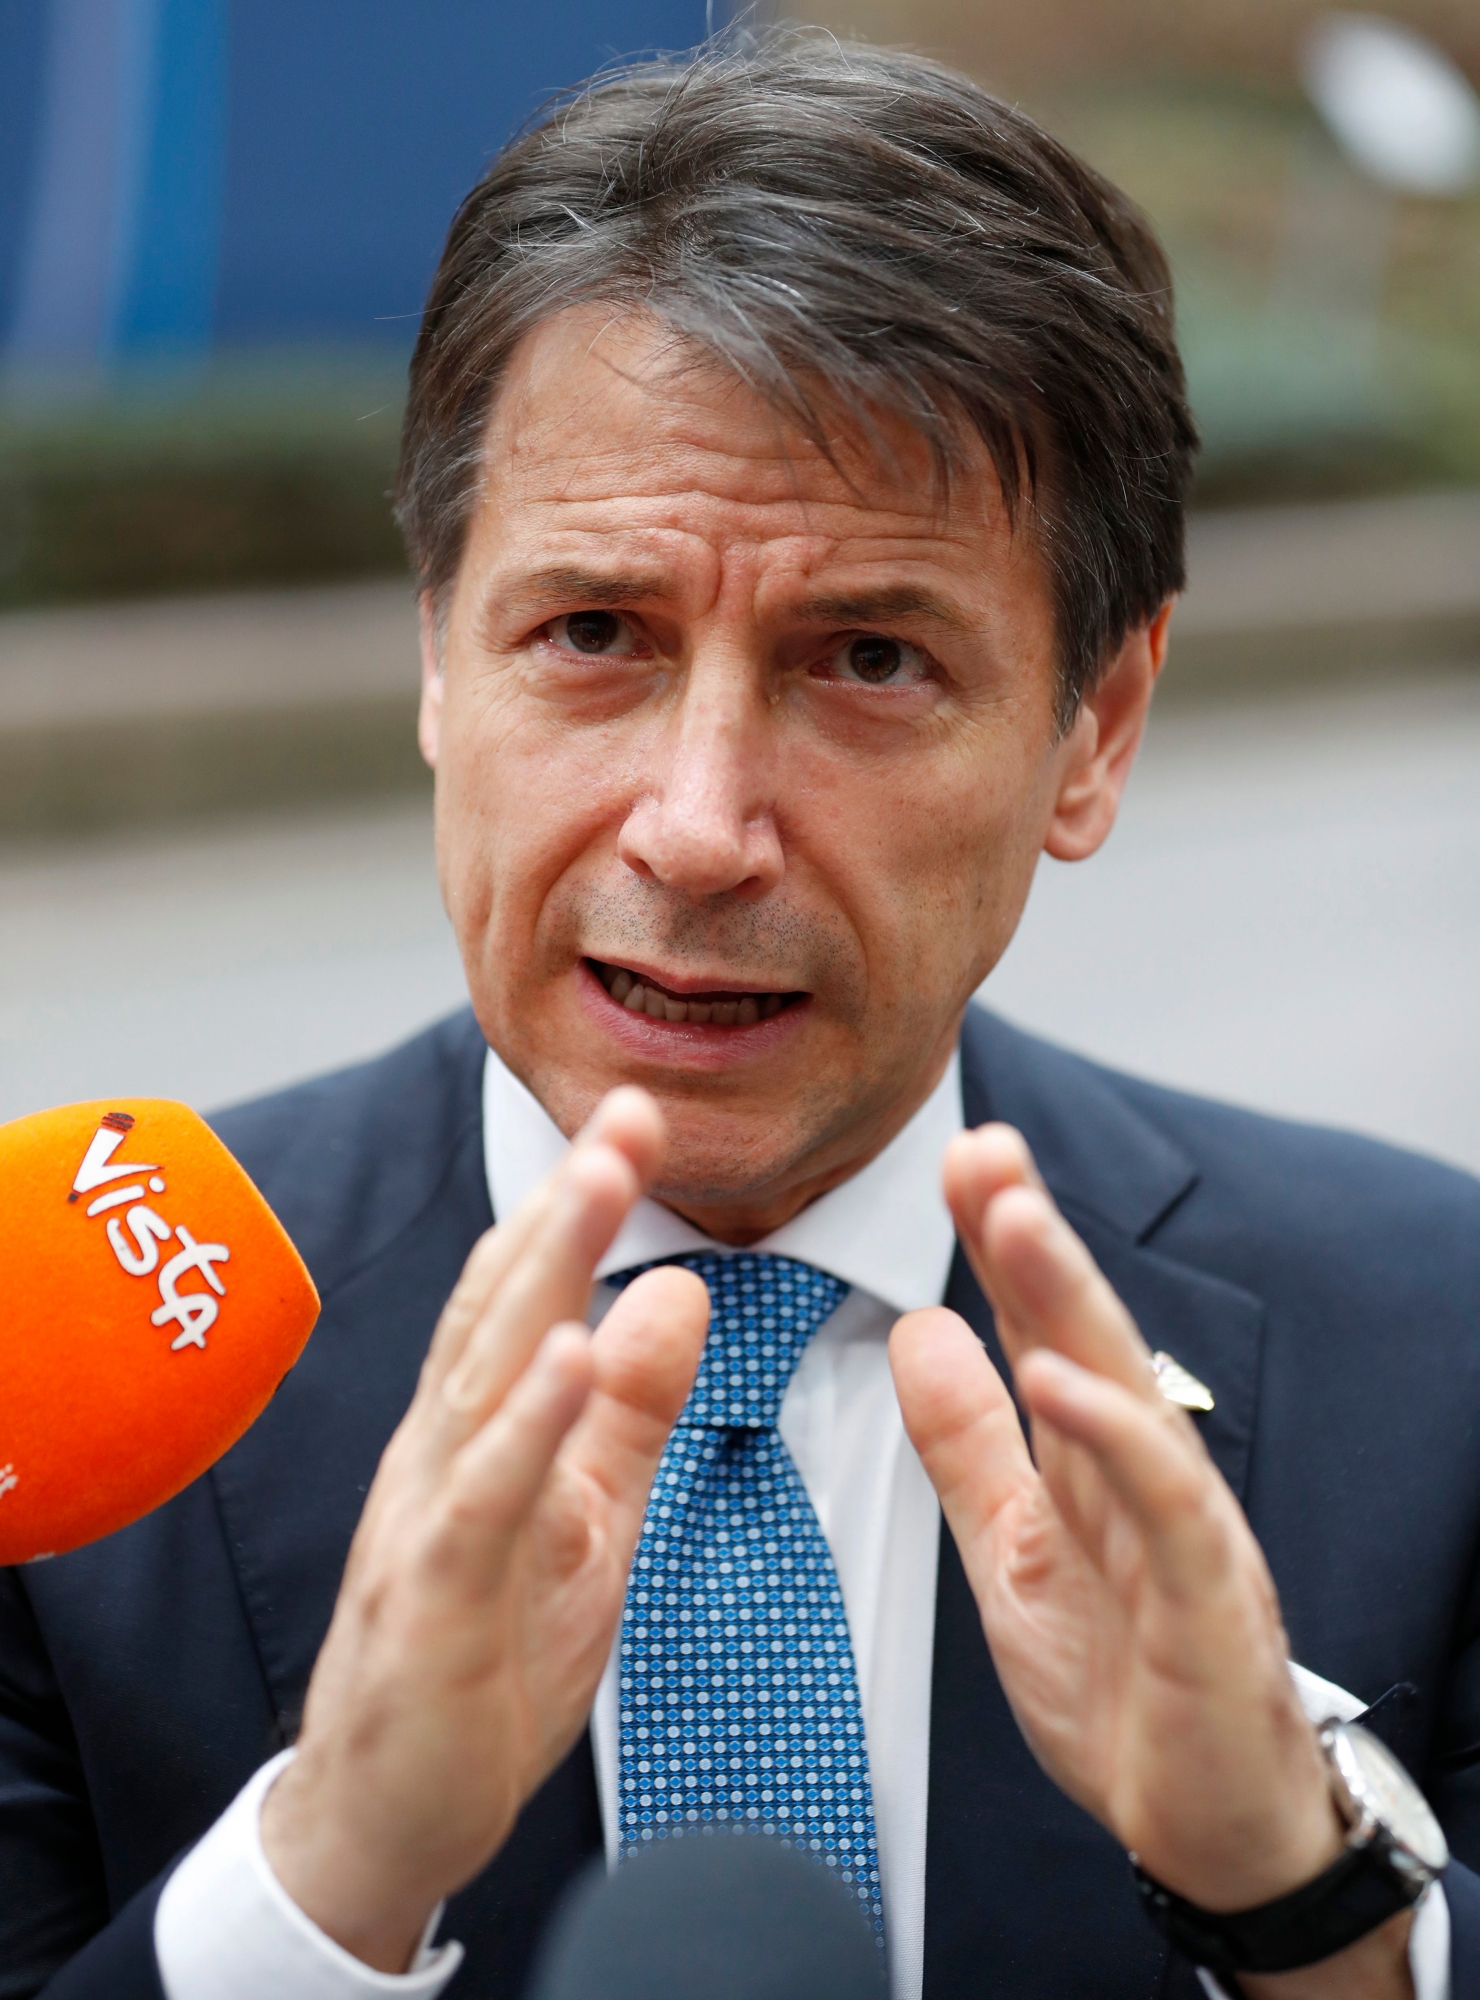 Italian Prime Minister Giuseppe Conte speaks with the media as he departs an EU-ASEM summit in Brussels, Friday, Oct. 19, 2018. EU leaders met with their Asian counterparts Friday to discuss trade, among other issues. (AP Photo/Alastair Grant) Belgium EU Asia